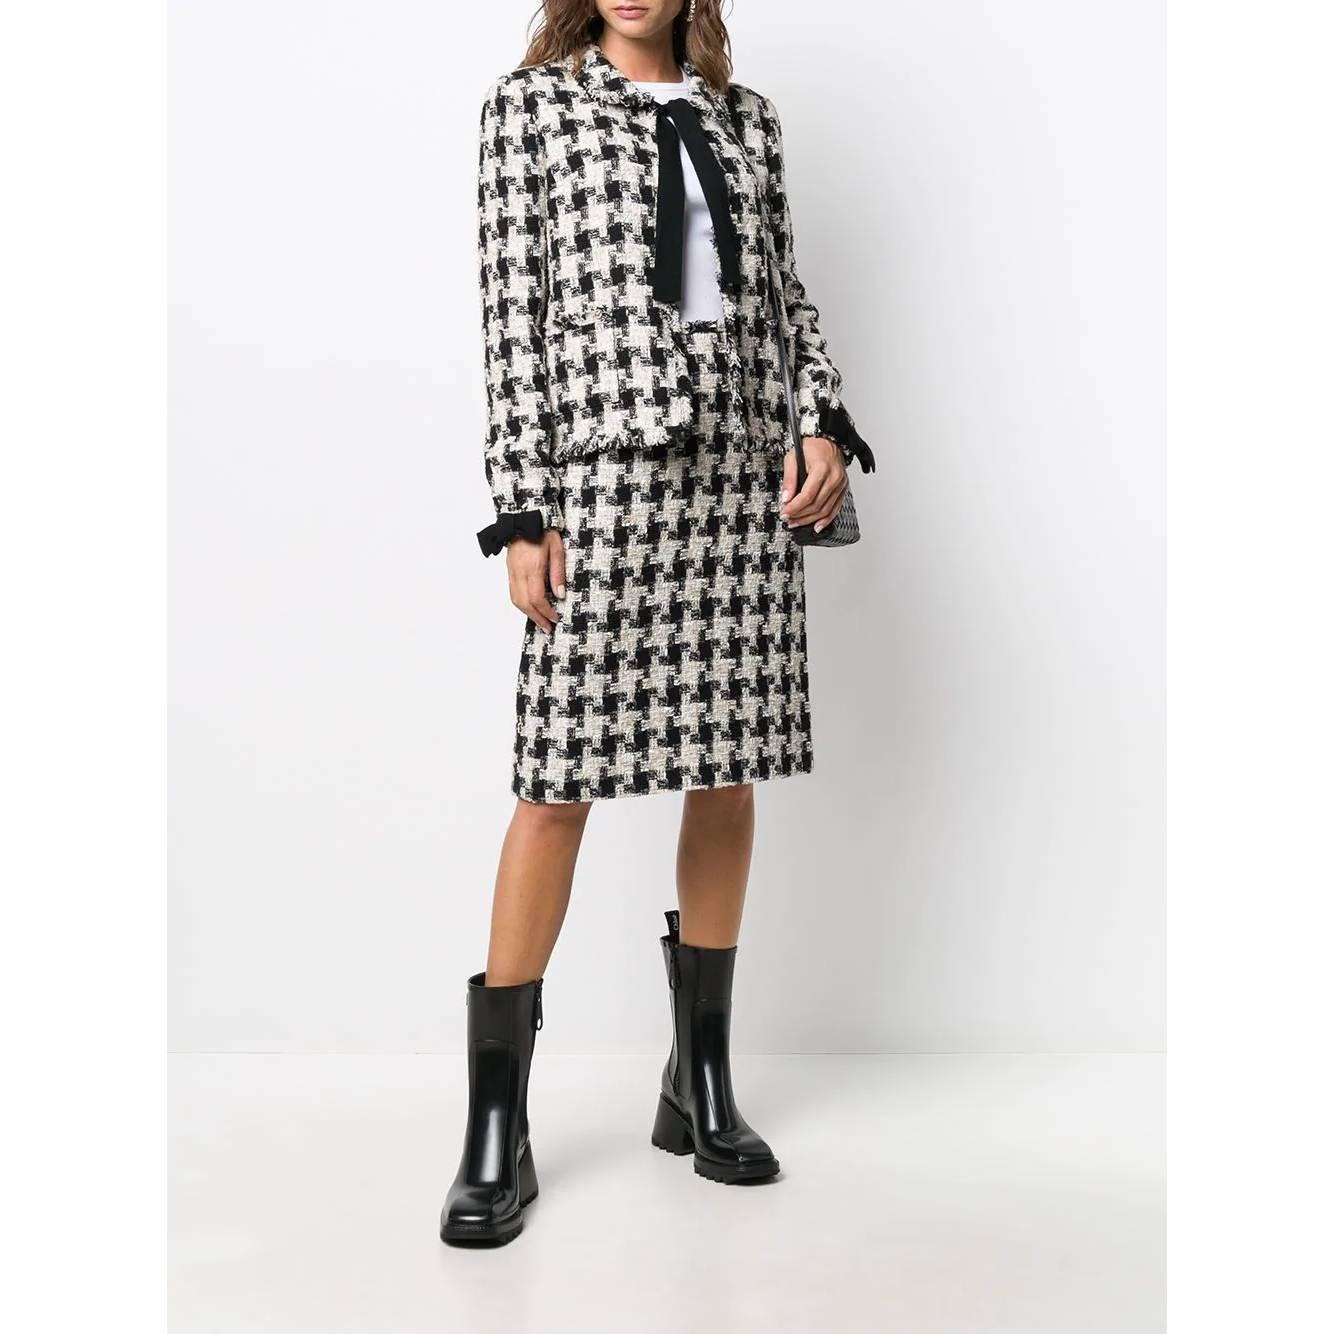 Chanel ivory and black checked tweed suit composed by jacket and skirt. Classic collar and bow fastening jacket, long sleeves and elastic cuffs with decorative black bow. Midi skirt with fringed hem and back closure with invisible zip.

Years: